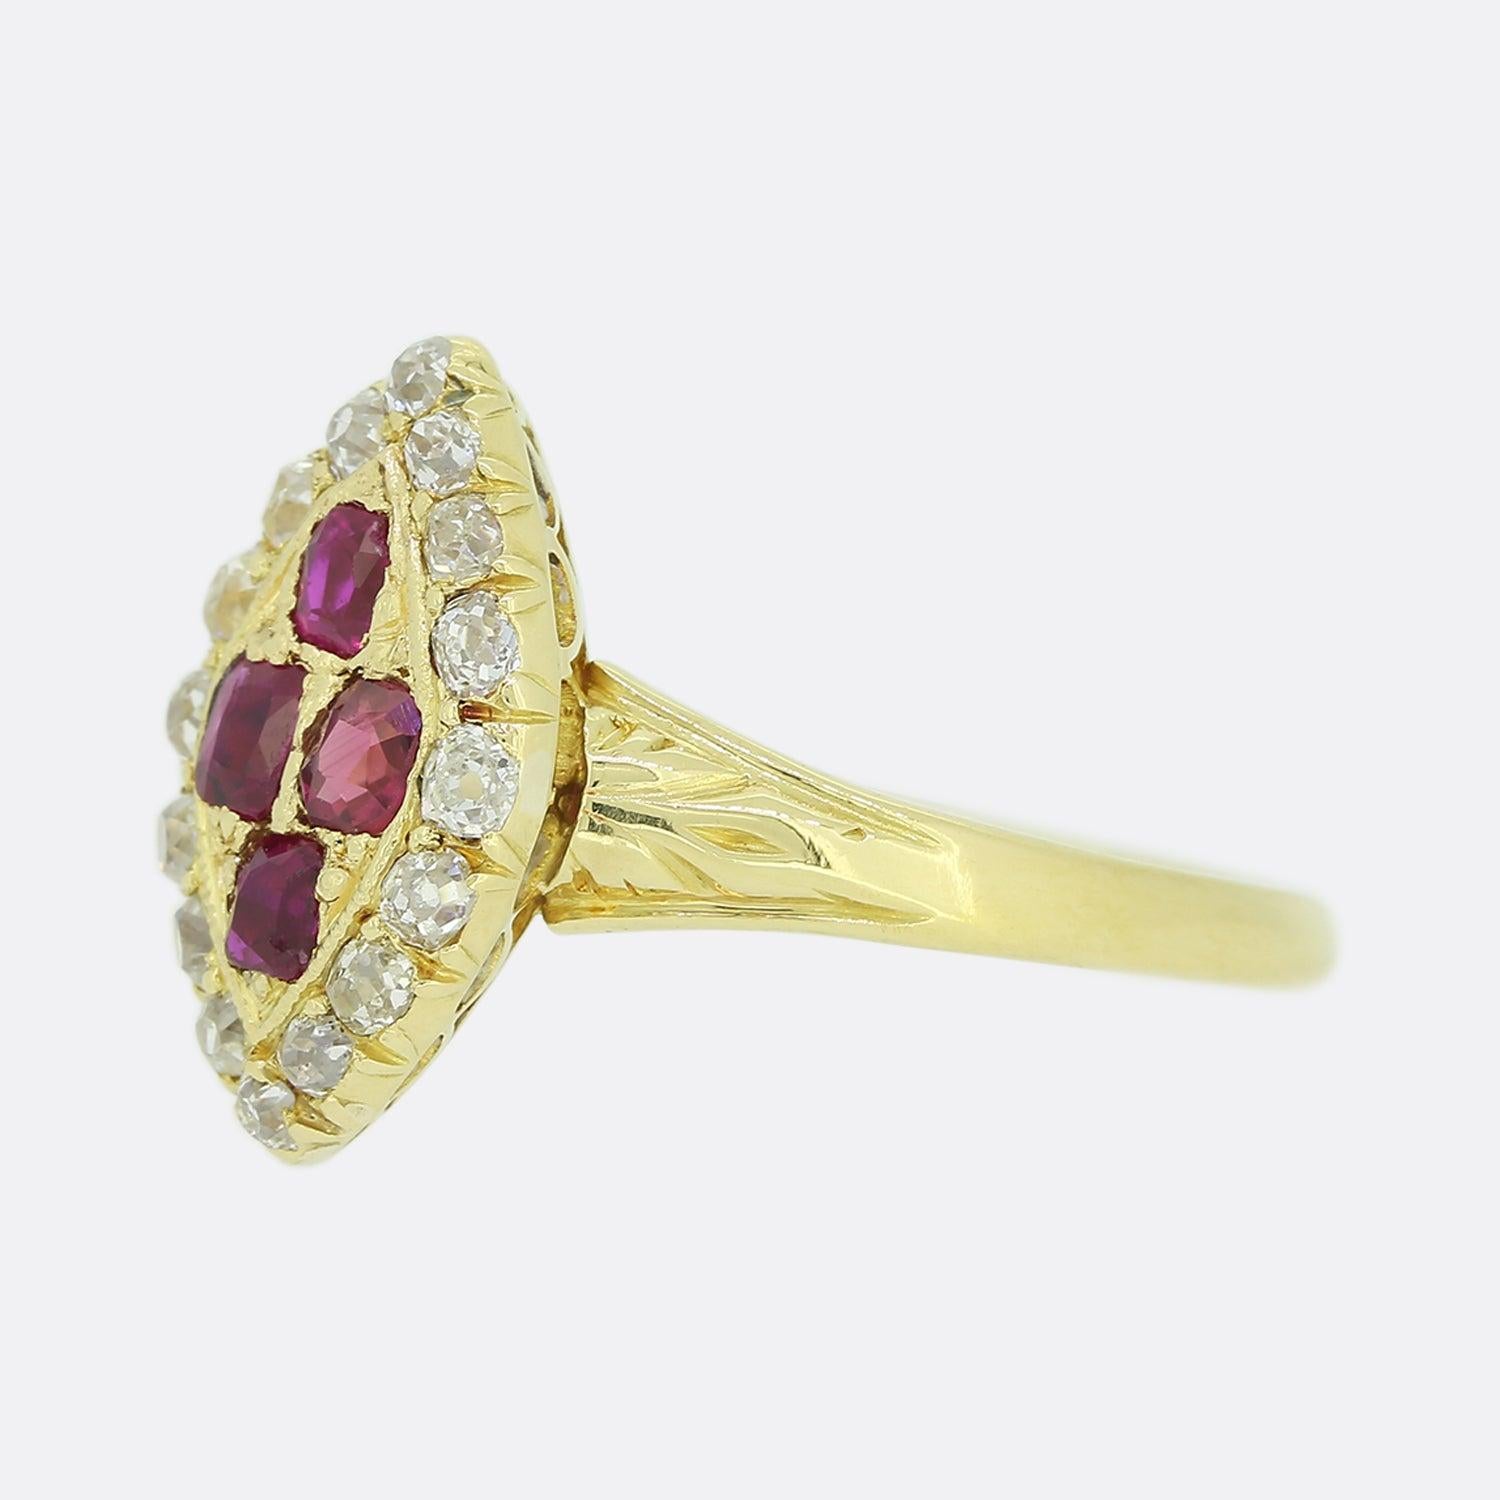 Here we have an excellently crafted ruby and diamond navette ring dating back to the Edwardian era. The ring's boat-shaped face showcases a quartet of cushion shaped rubies upon a mottled backdrop. These focal stones are accentuated by an array of